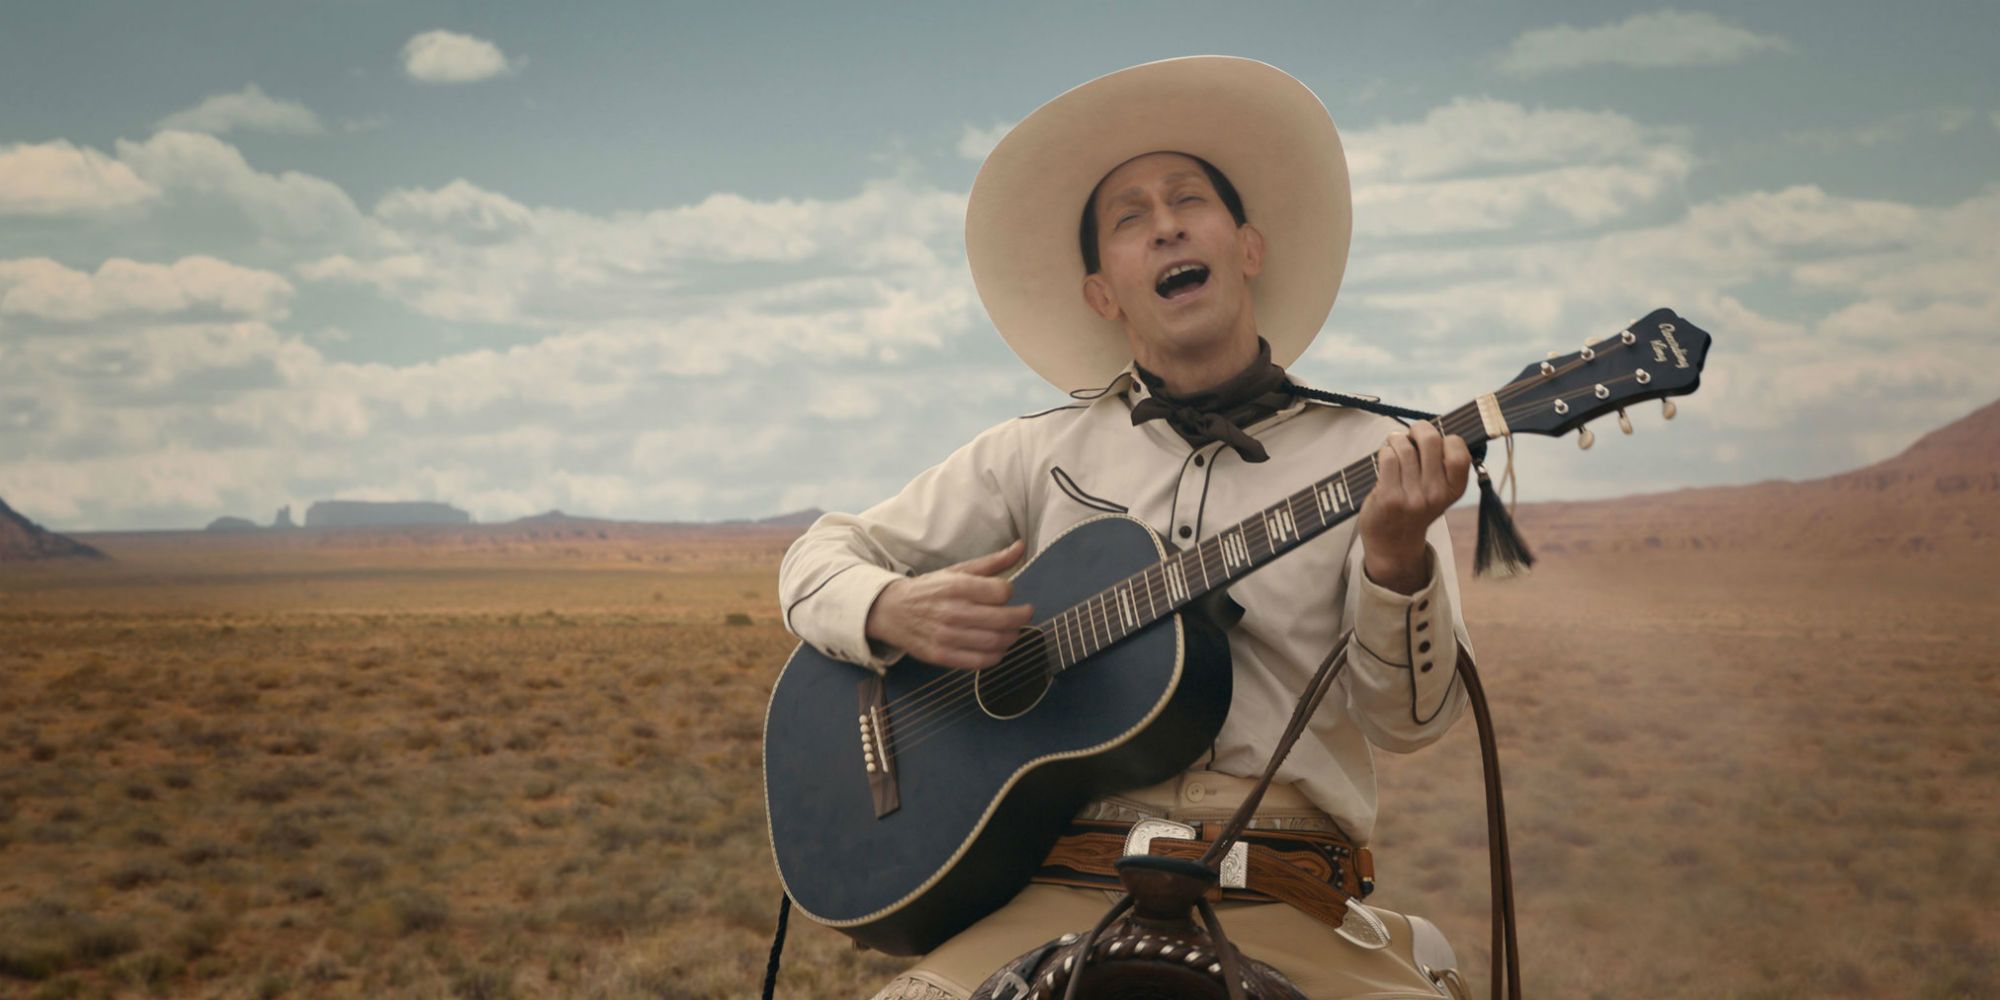 Tim Blake Nelson as Buster Scruggs playing his guitar and singing in the desert in The Ballad Of Buster Scruggs (2018)